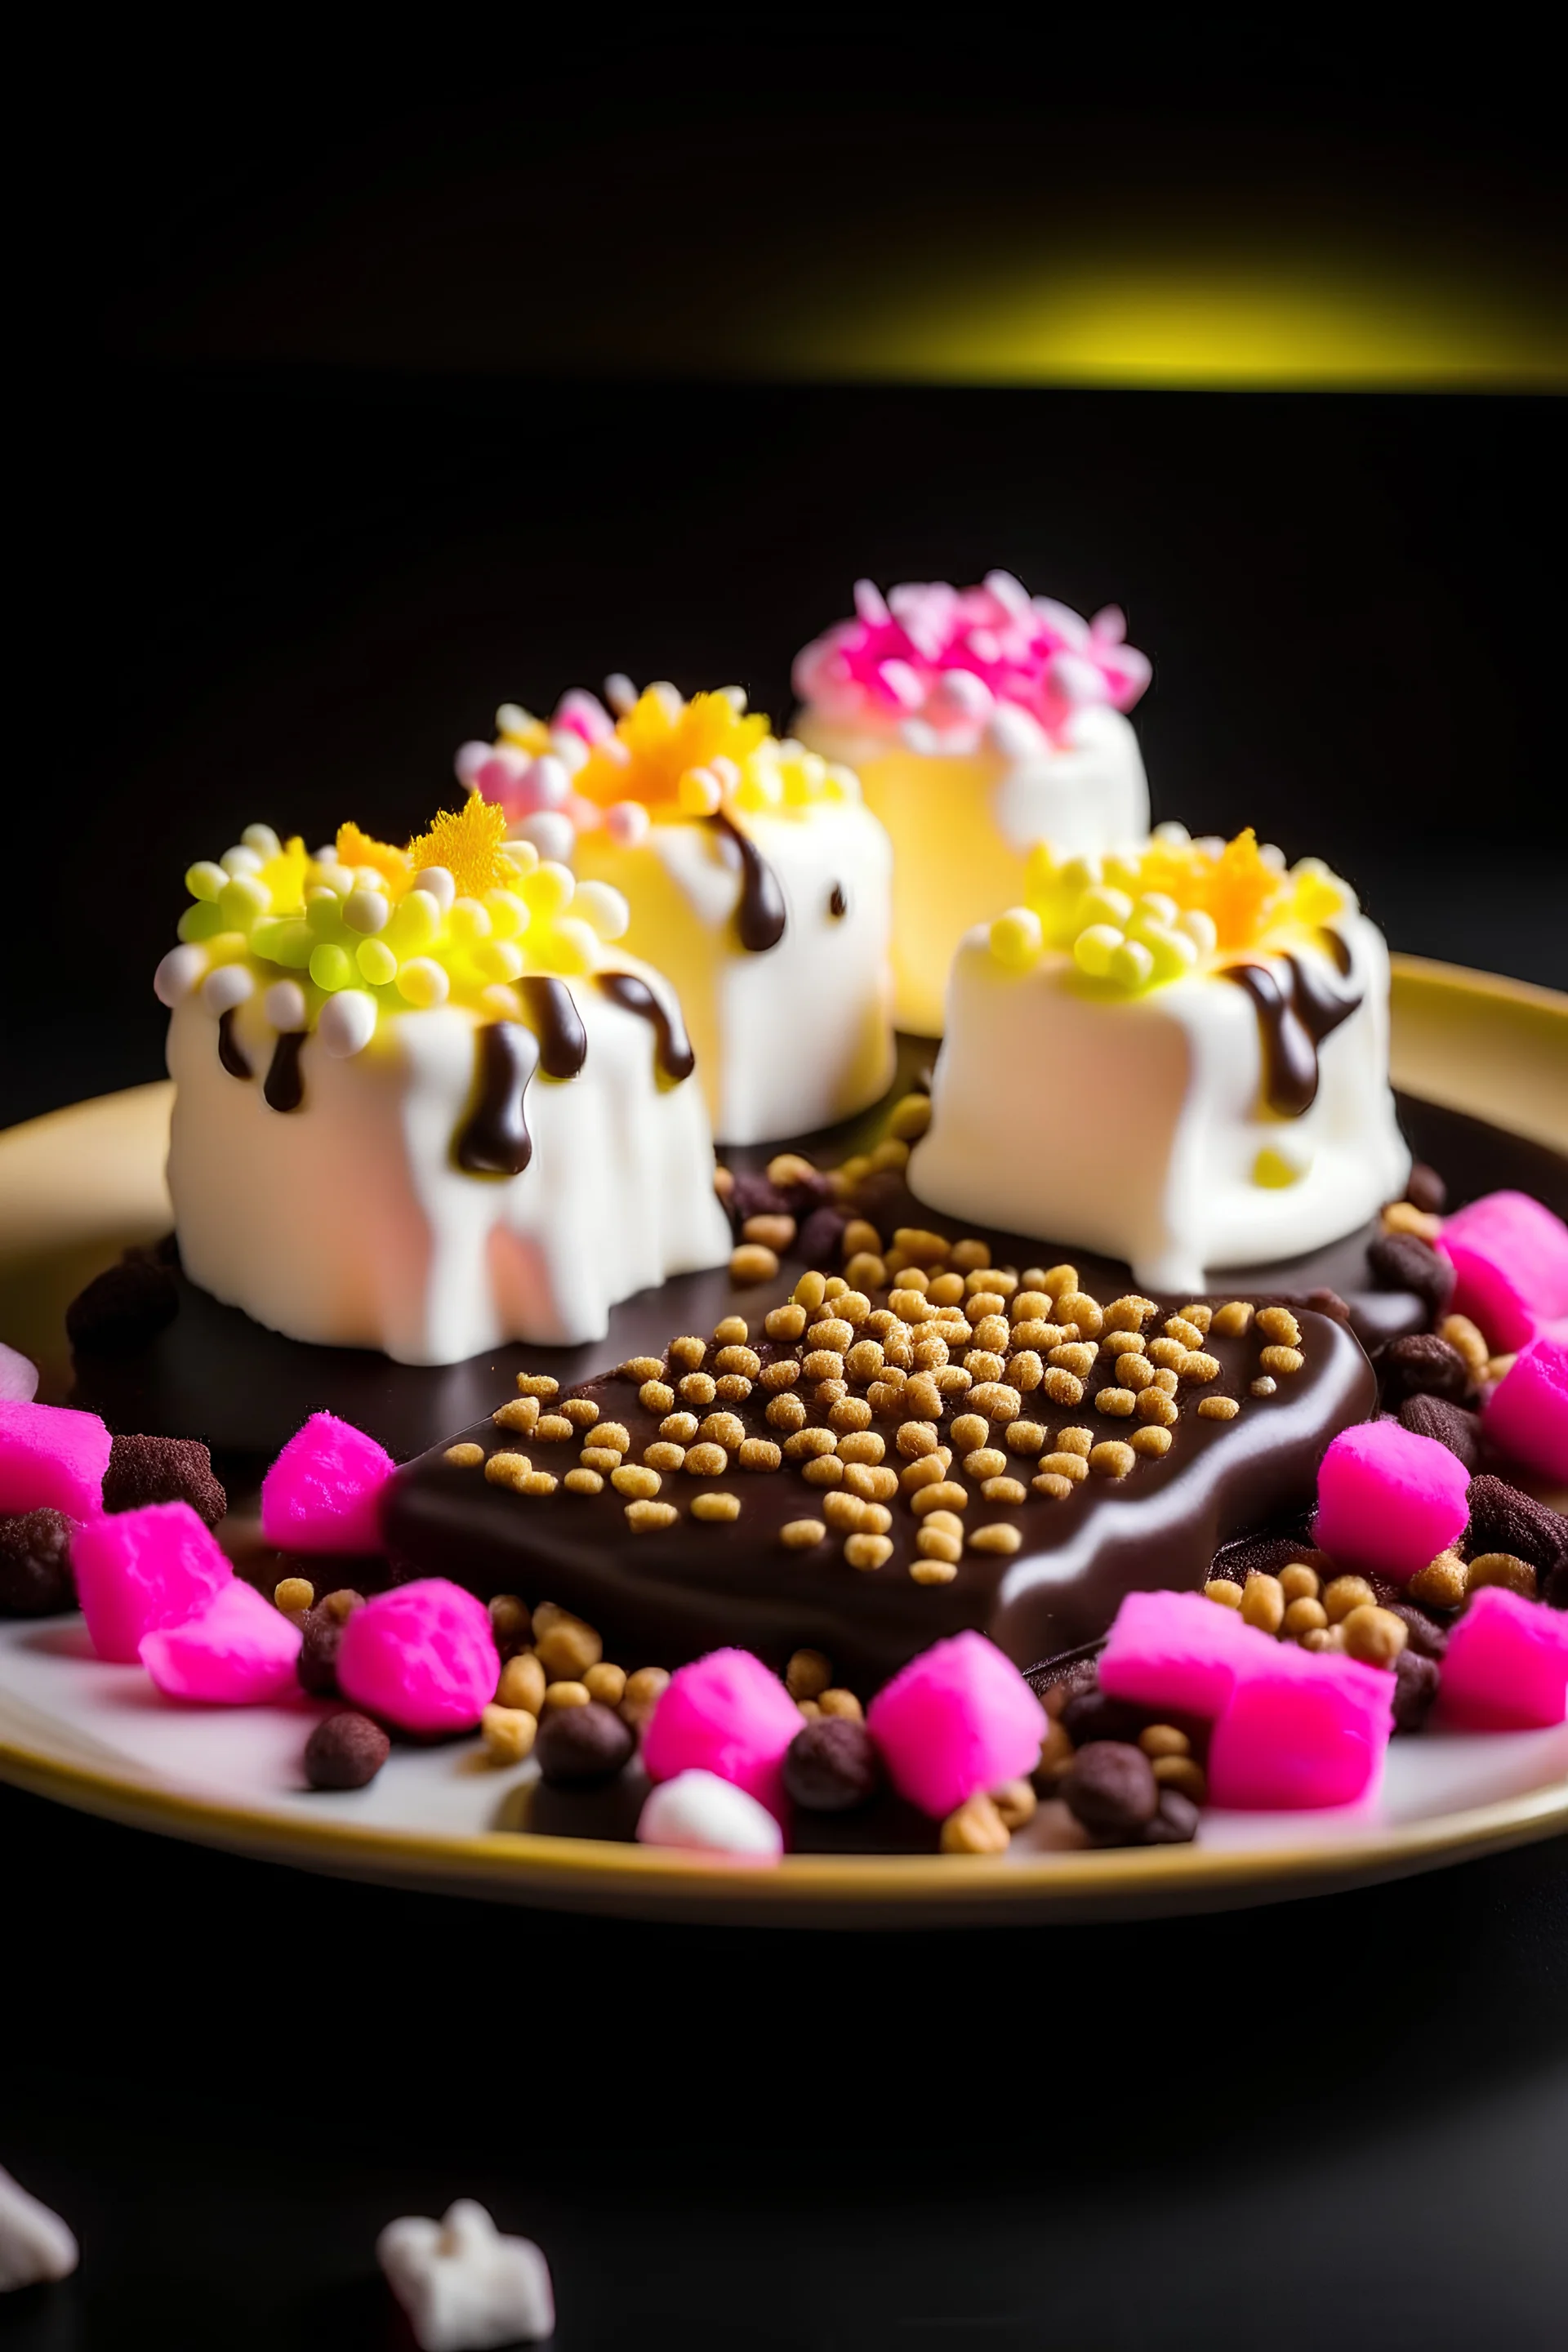 A plate of custard covered with chocolate and decorated with marshmallows